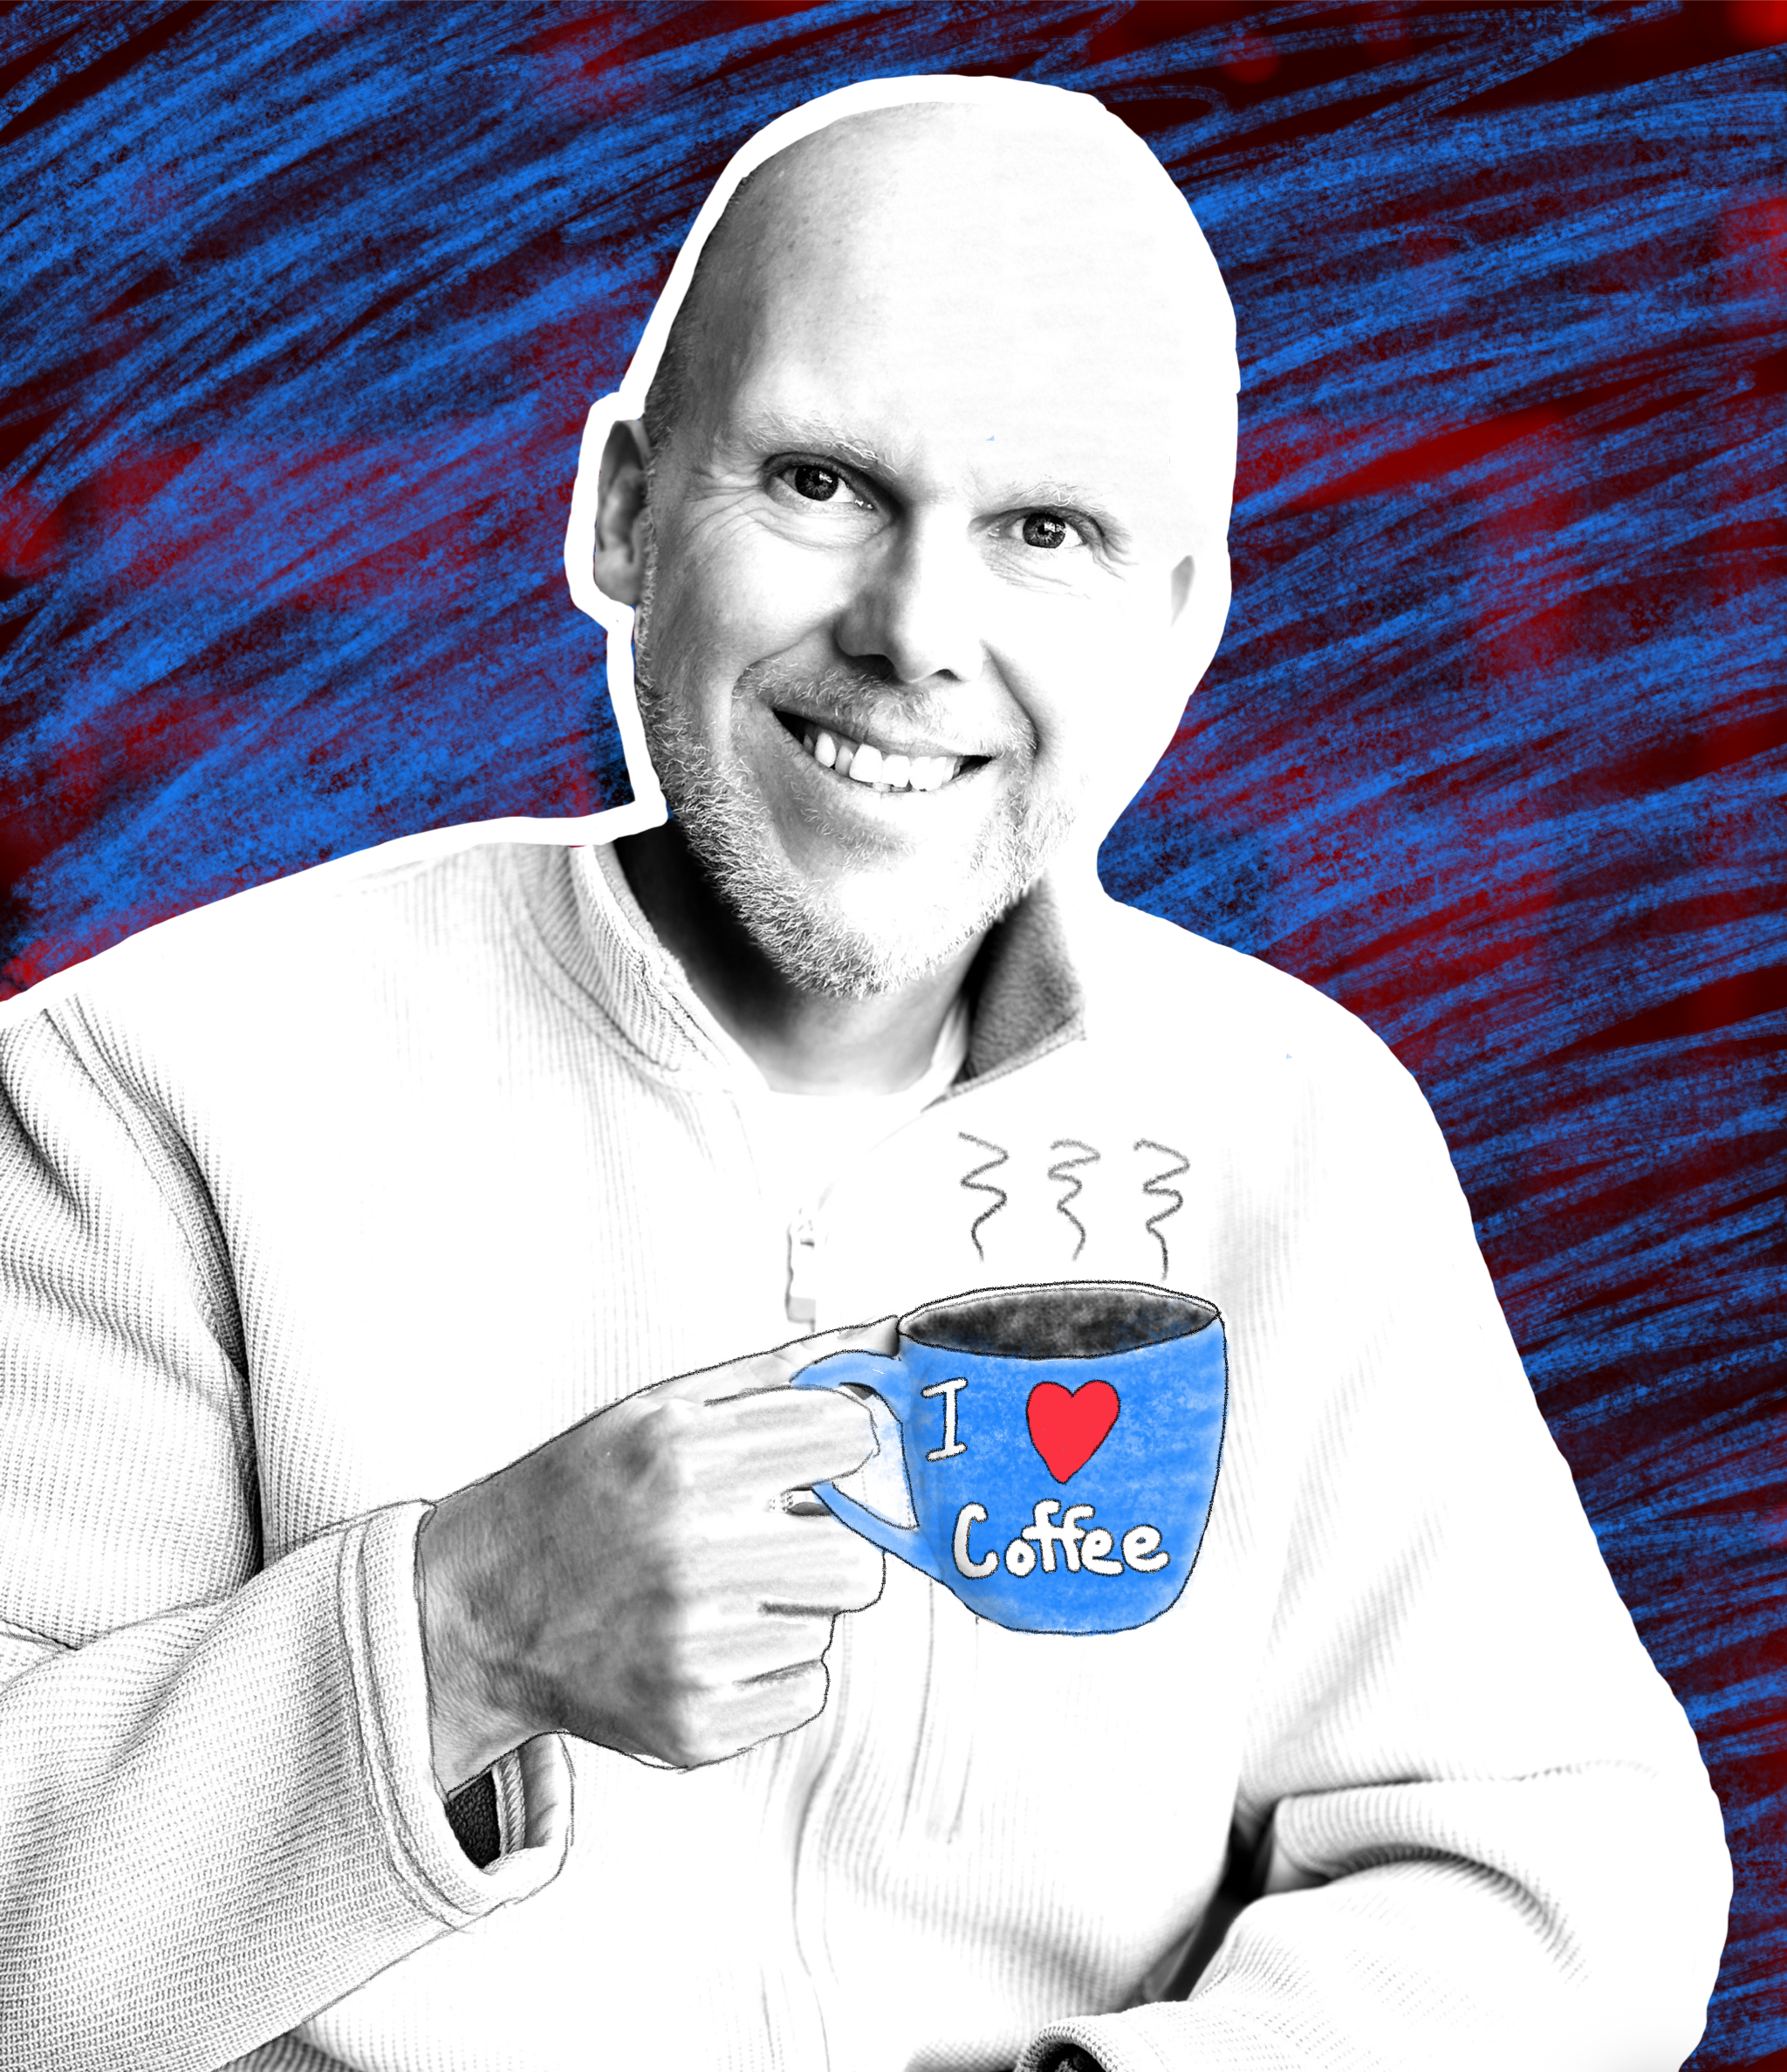 A male holding a cup of coffee with I heart/love coffee drawn on the mug.